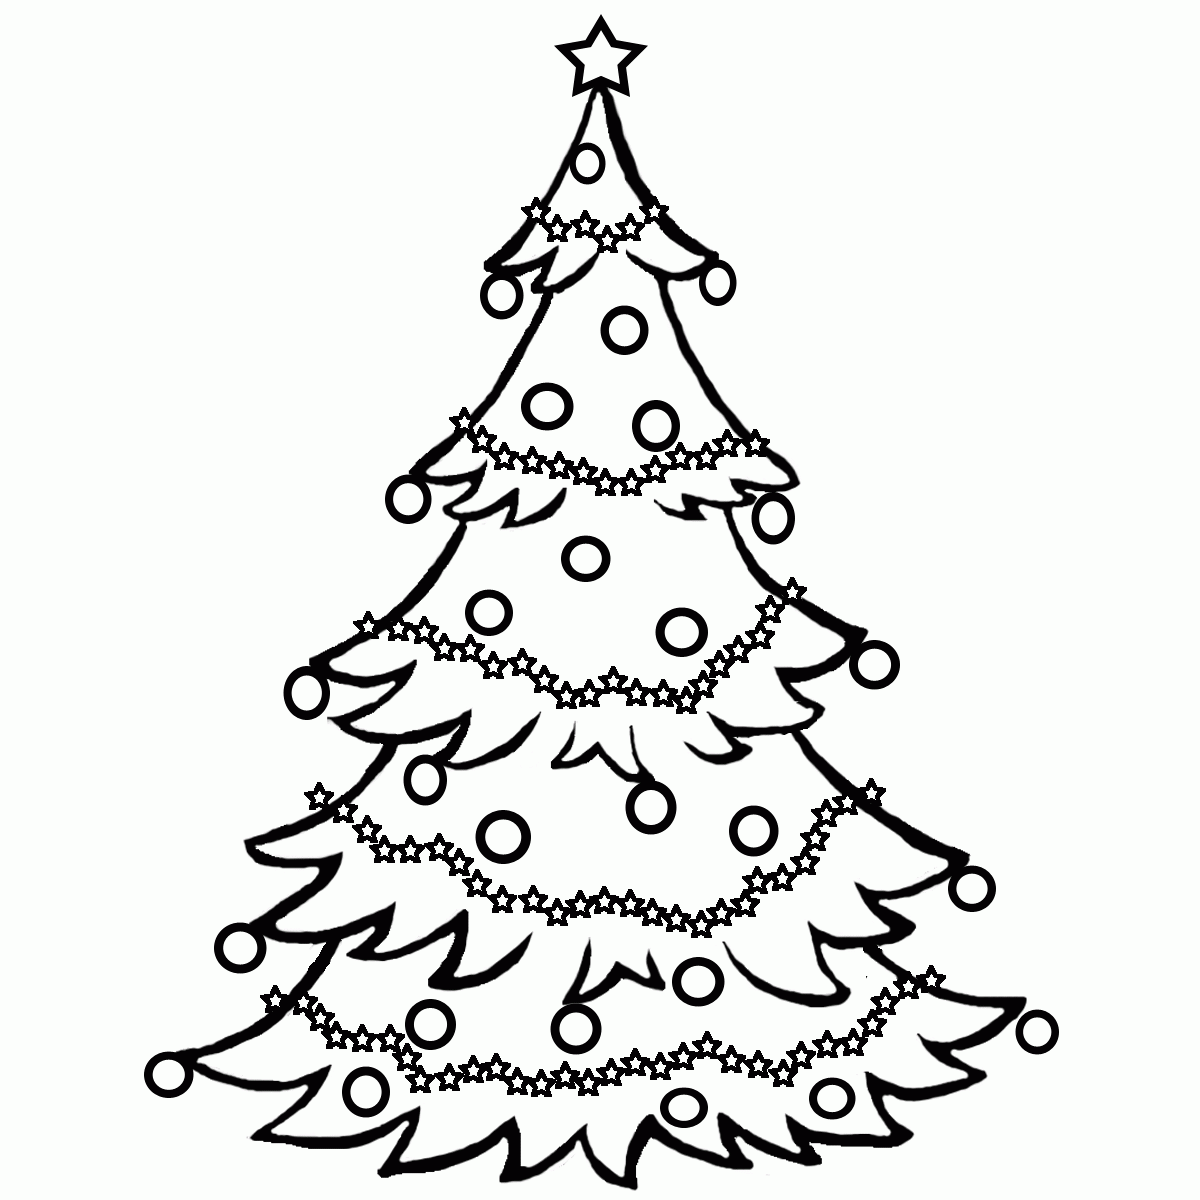 Christmas Tree Coloring Page Printable | Christmas Coloring pages ...